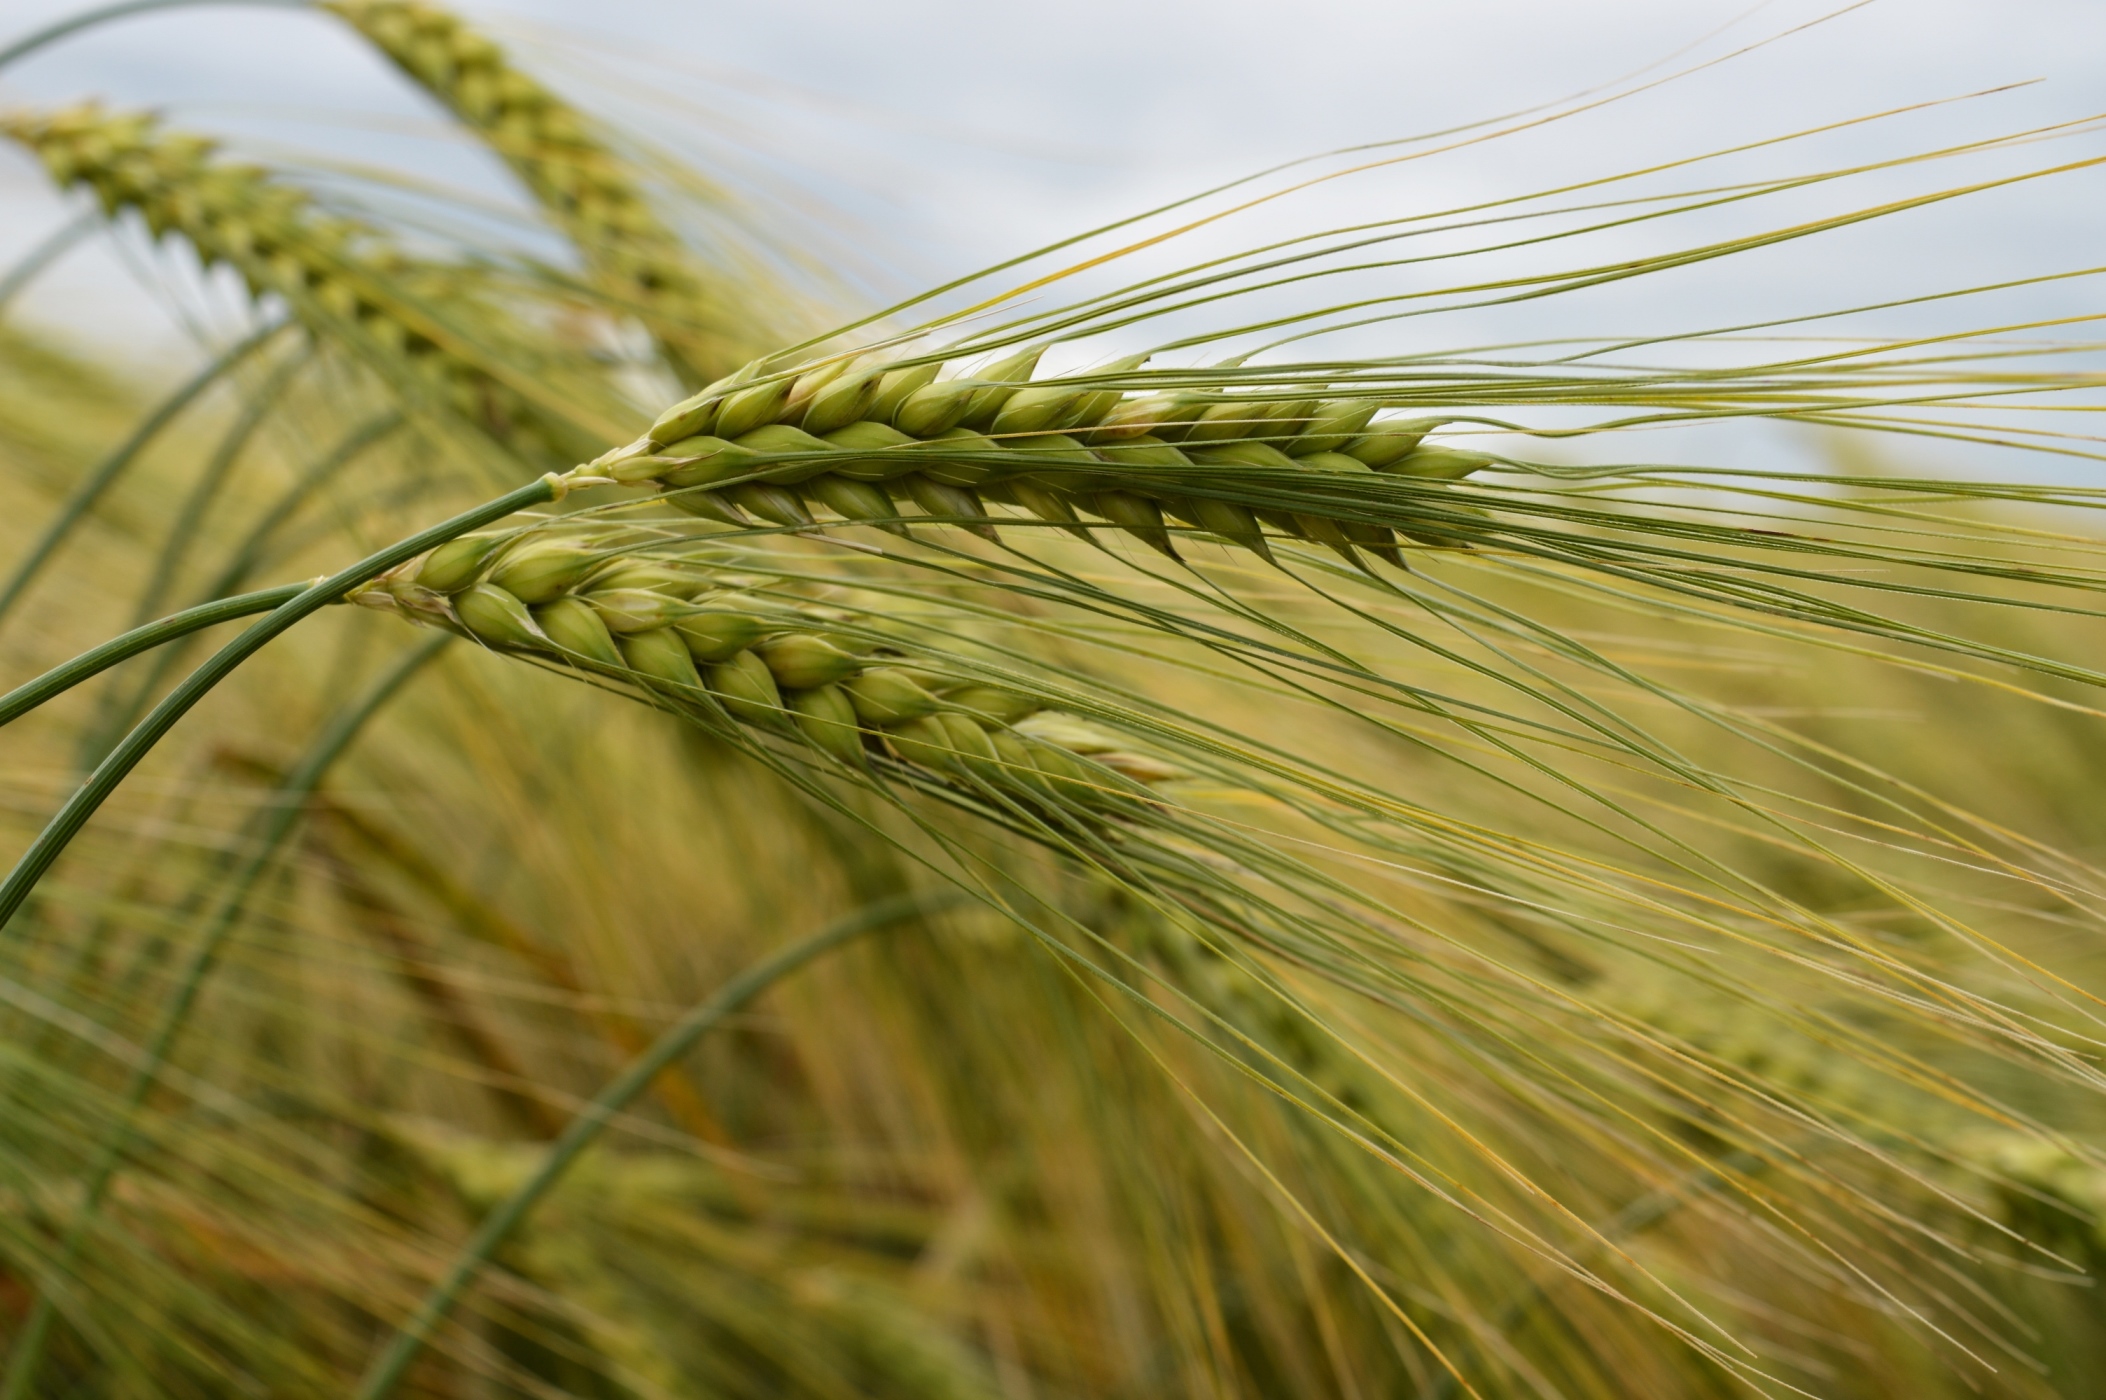 There are hopes a gene variation discovery will have a significant economic impact for barley.